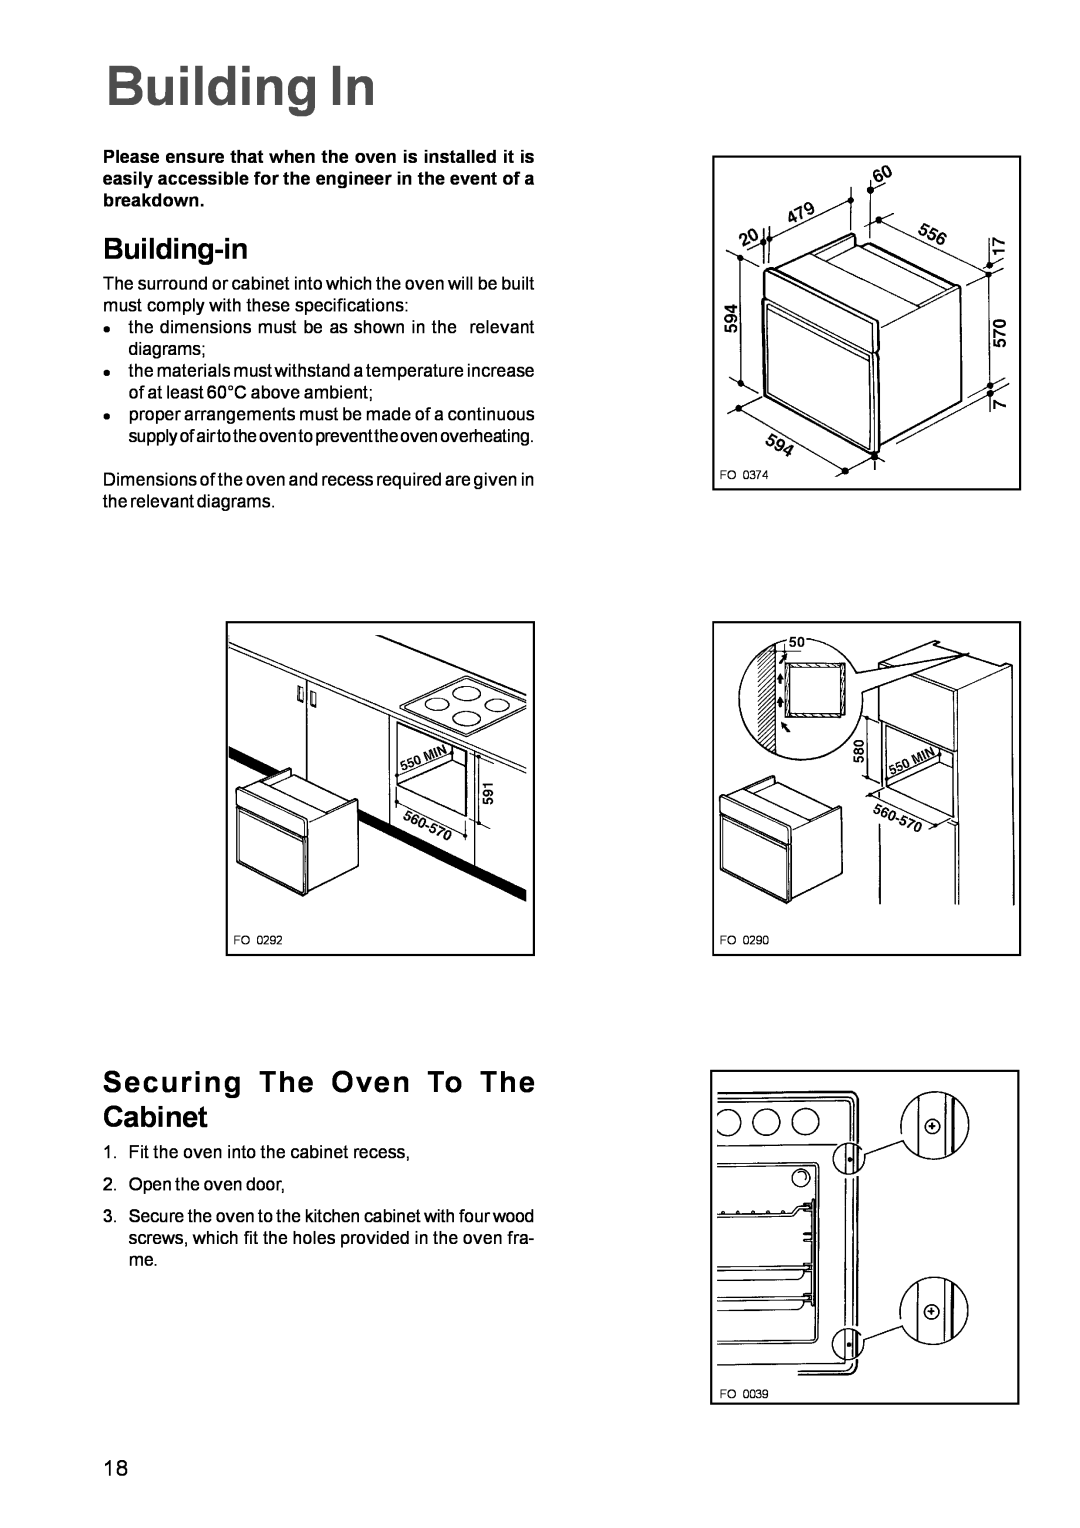 Zanussi ZBQ 365 manual Building In, Building-in, Securing The Oven To The Cabinet 